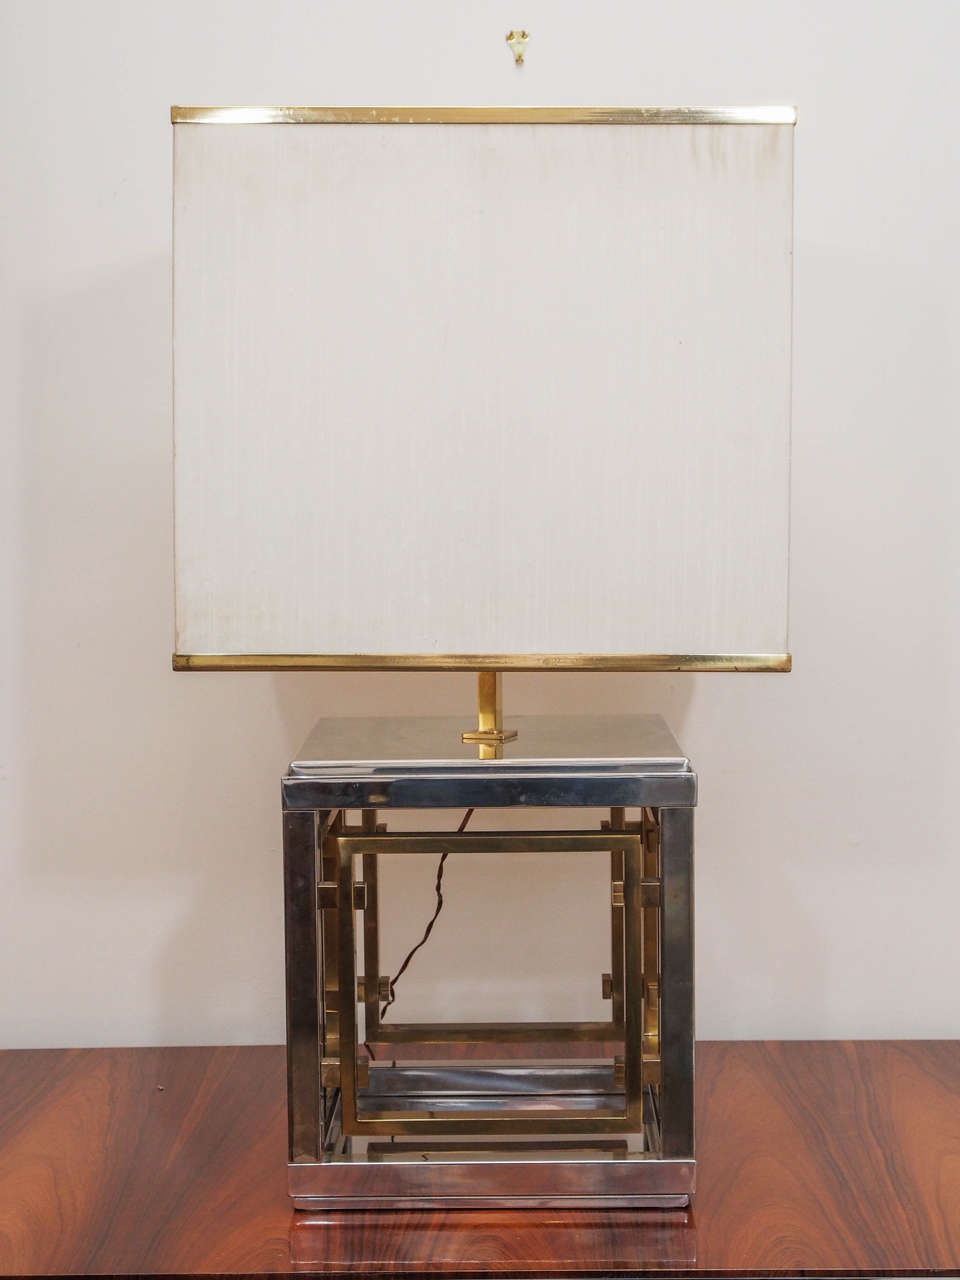 Call for sale price. Square two-light table lamp in brass and chrome; measurements include the original brass-trimmed shade.